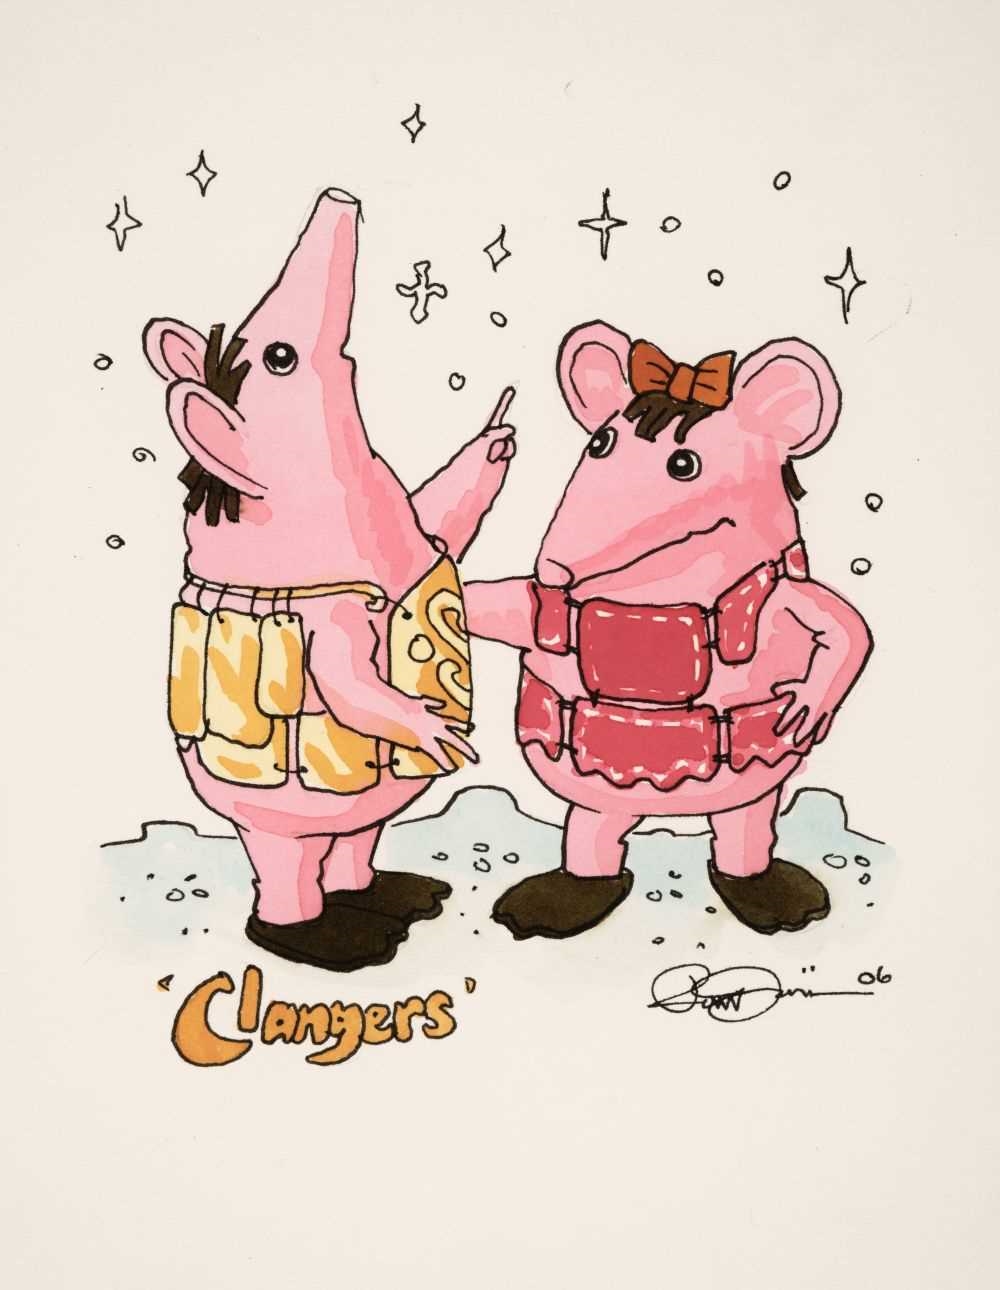 Clangers by Peter Firmin, 2016